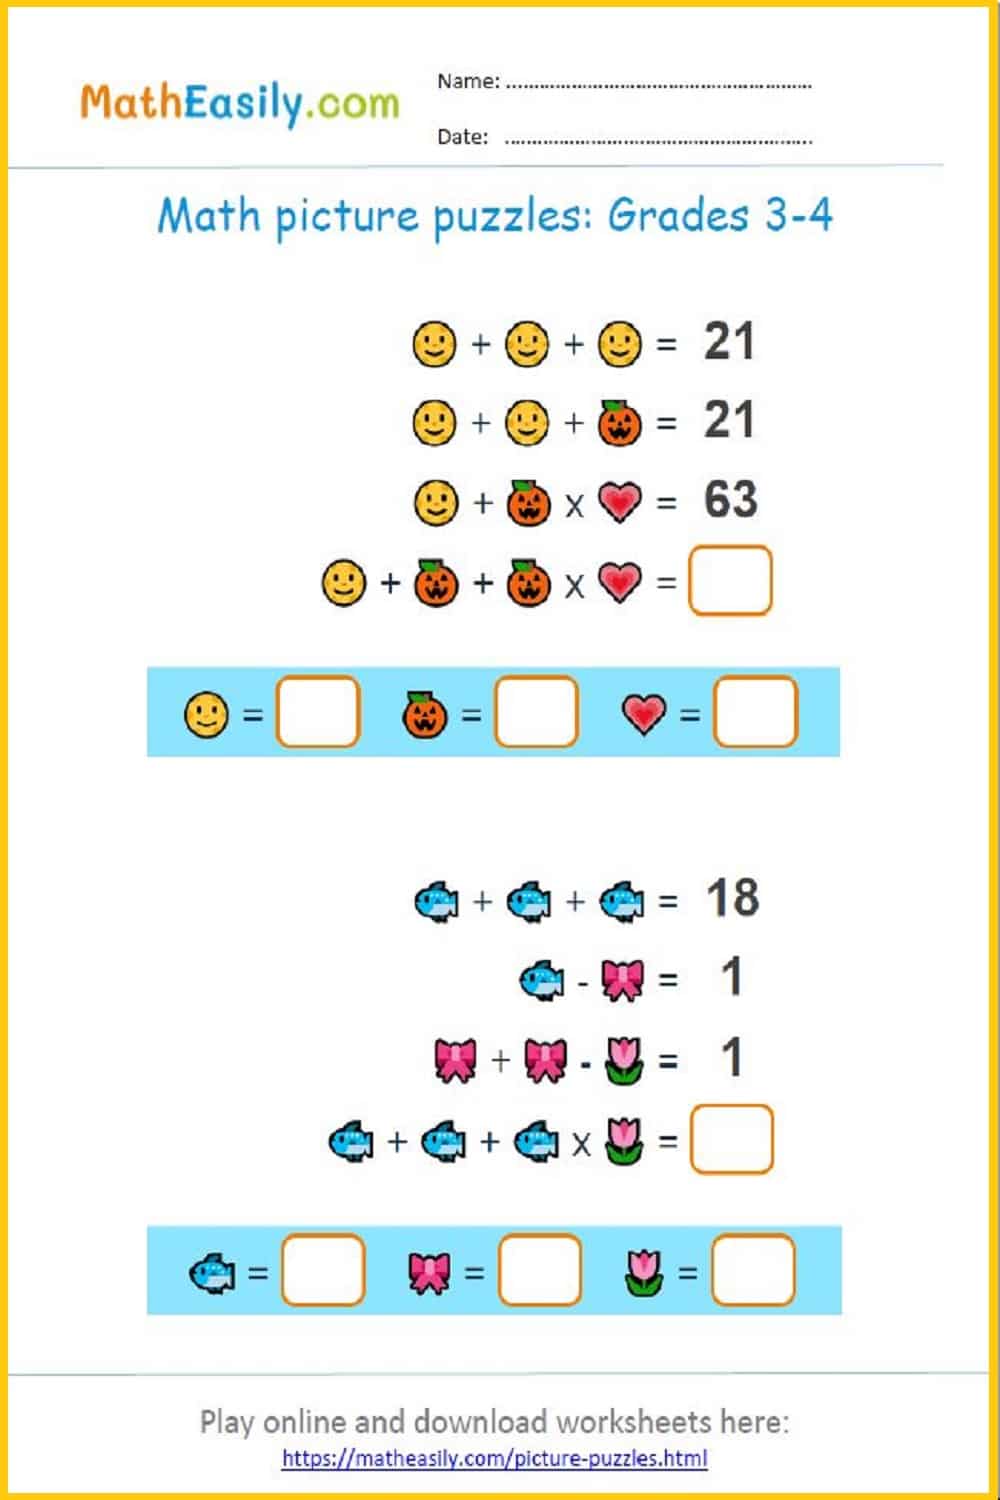 4th grade math games printable. Free 4th grade math games for the classroom.
Math problems for 4th graders. Free math games for grade 4.